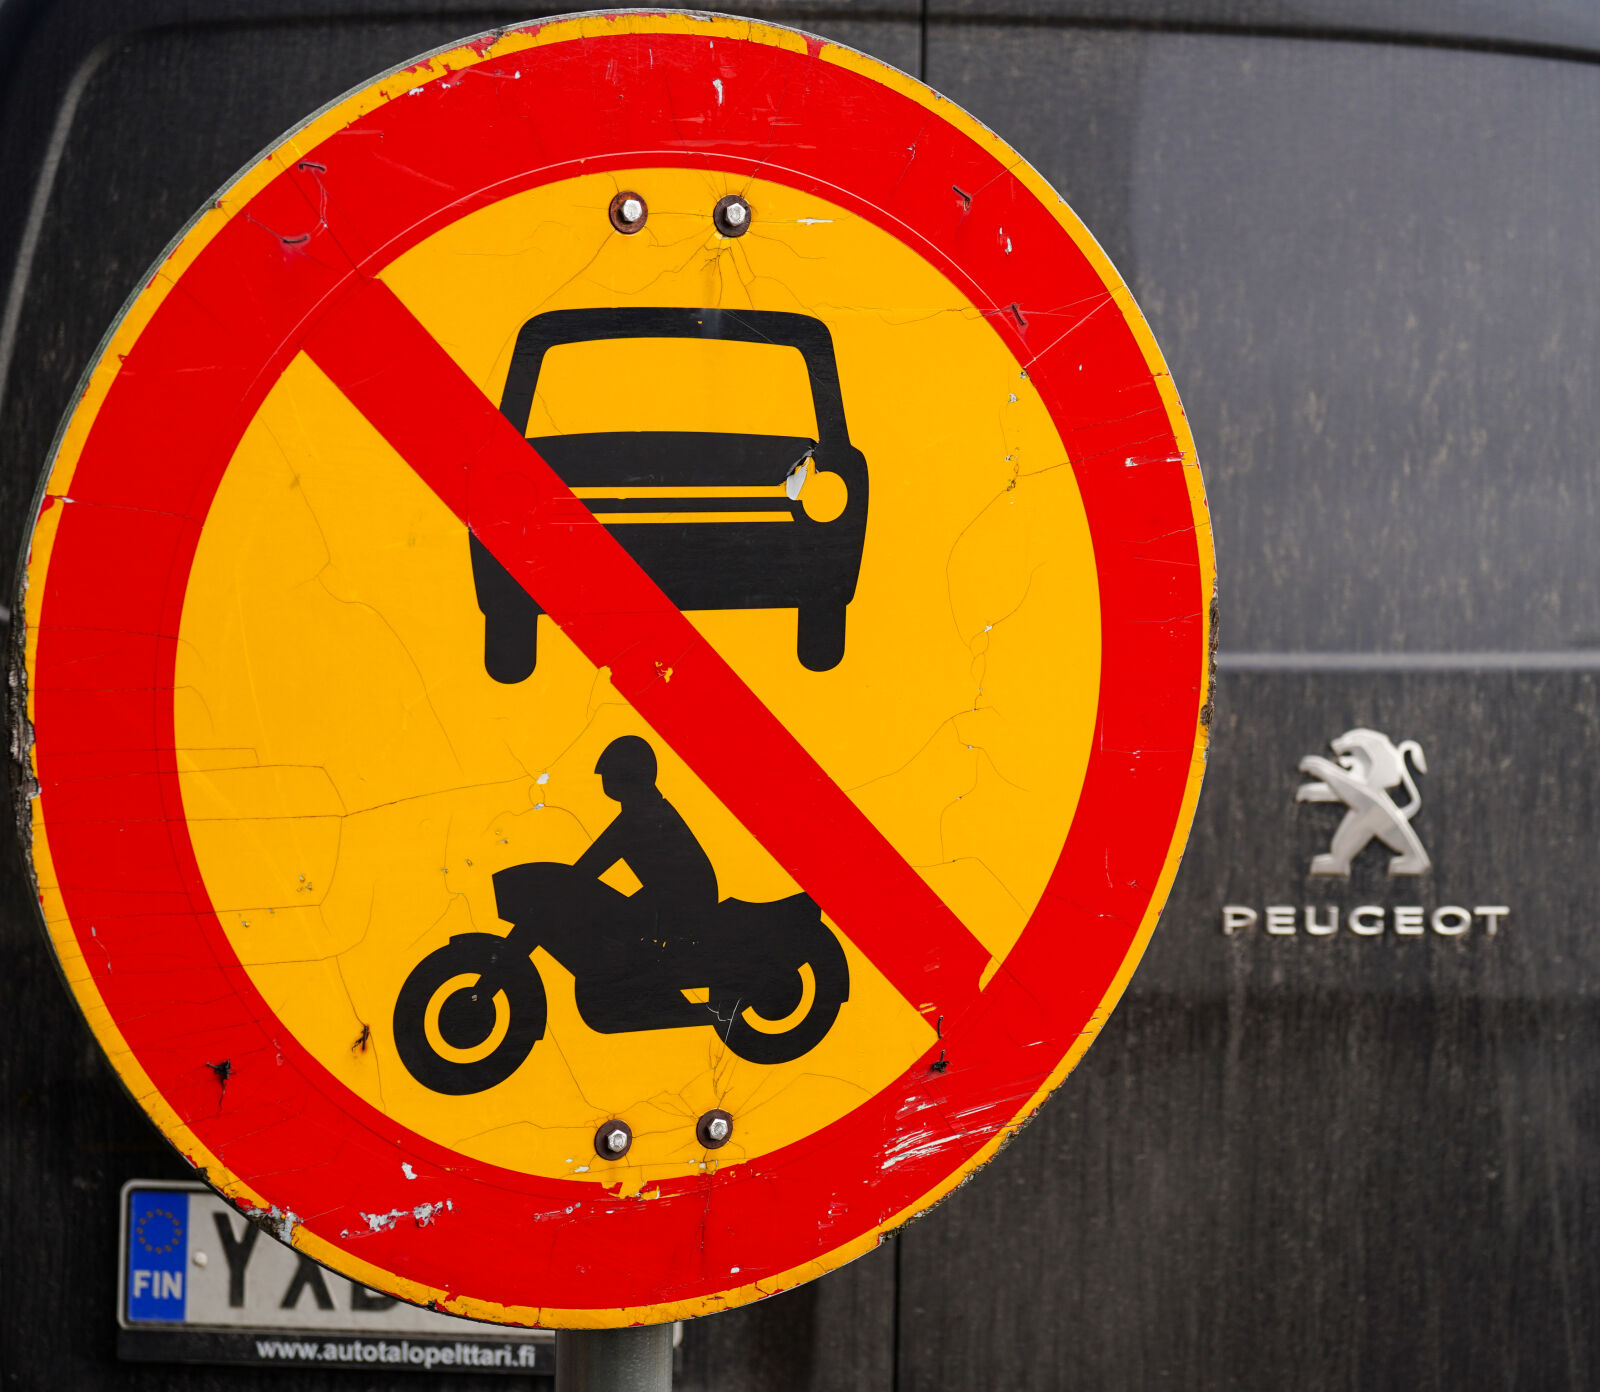 Sony a7C sample photo. No parking peugeot photography